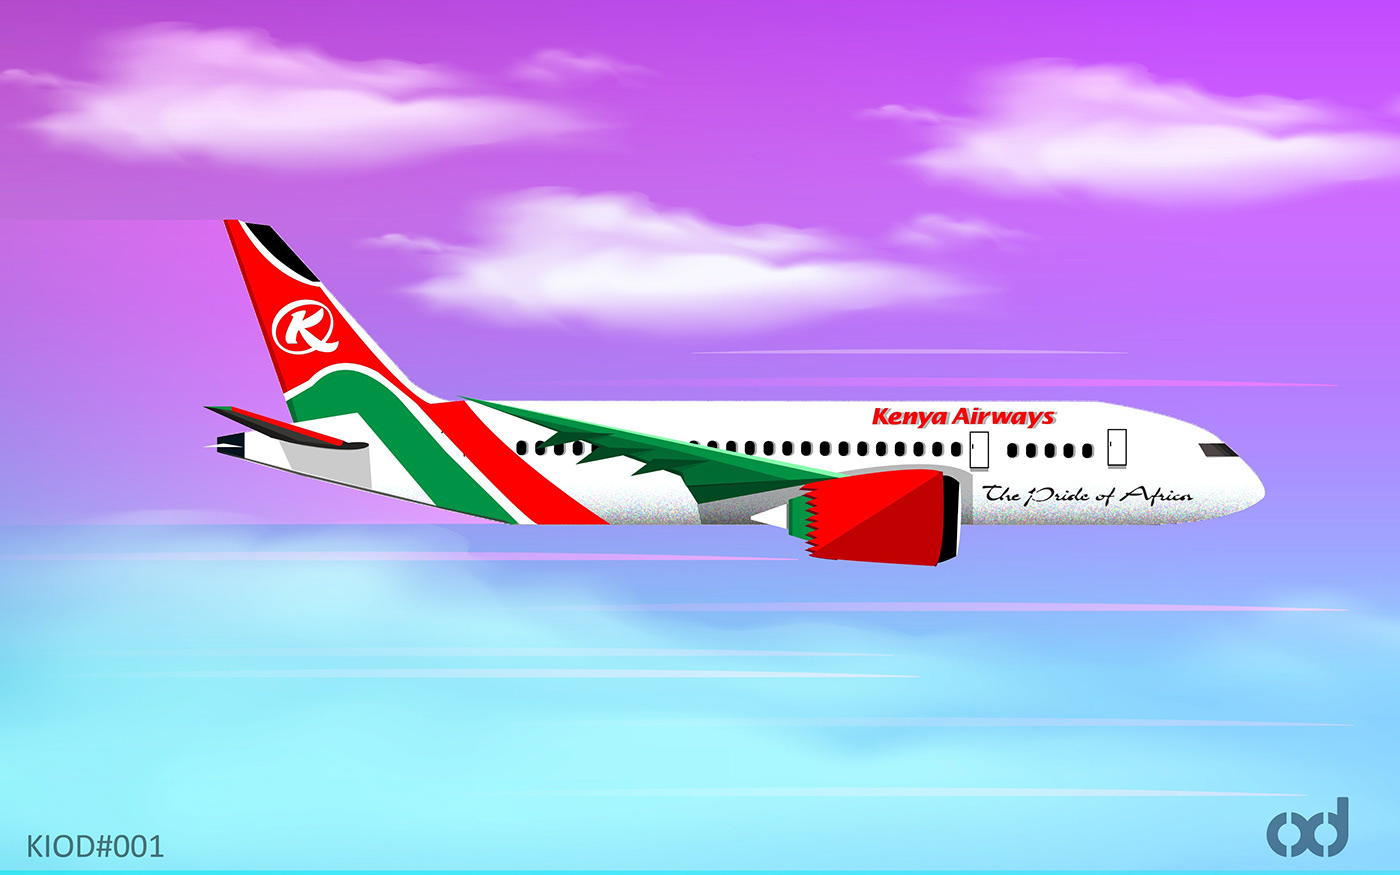 Took up a personal challenge to illustrate Kenya for the rest of the year starting with kenya Airways